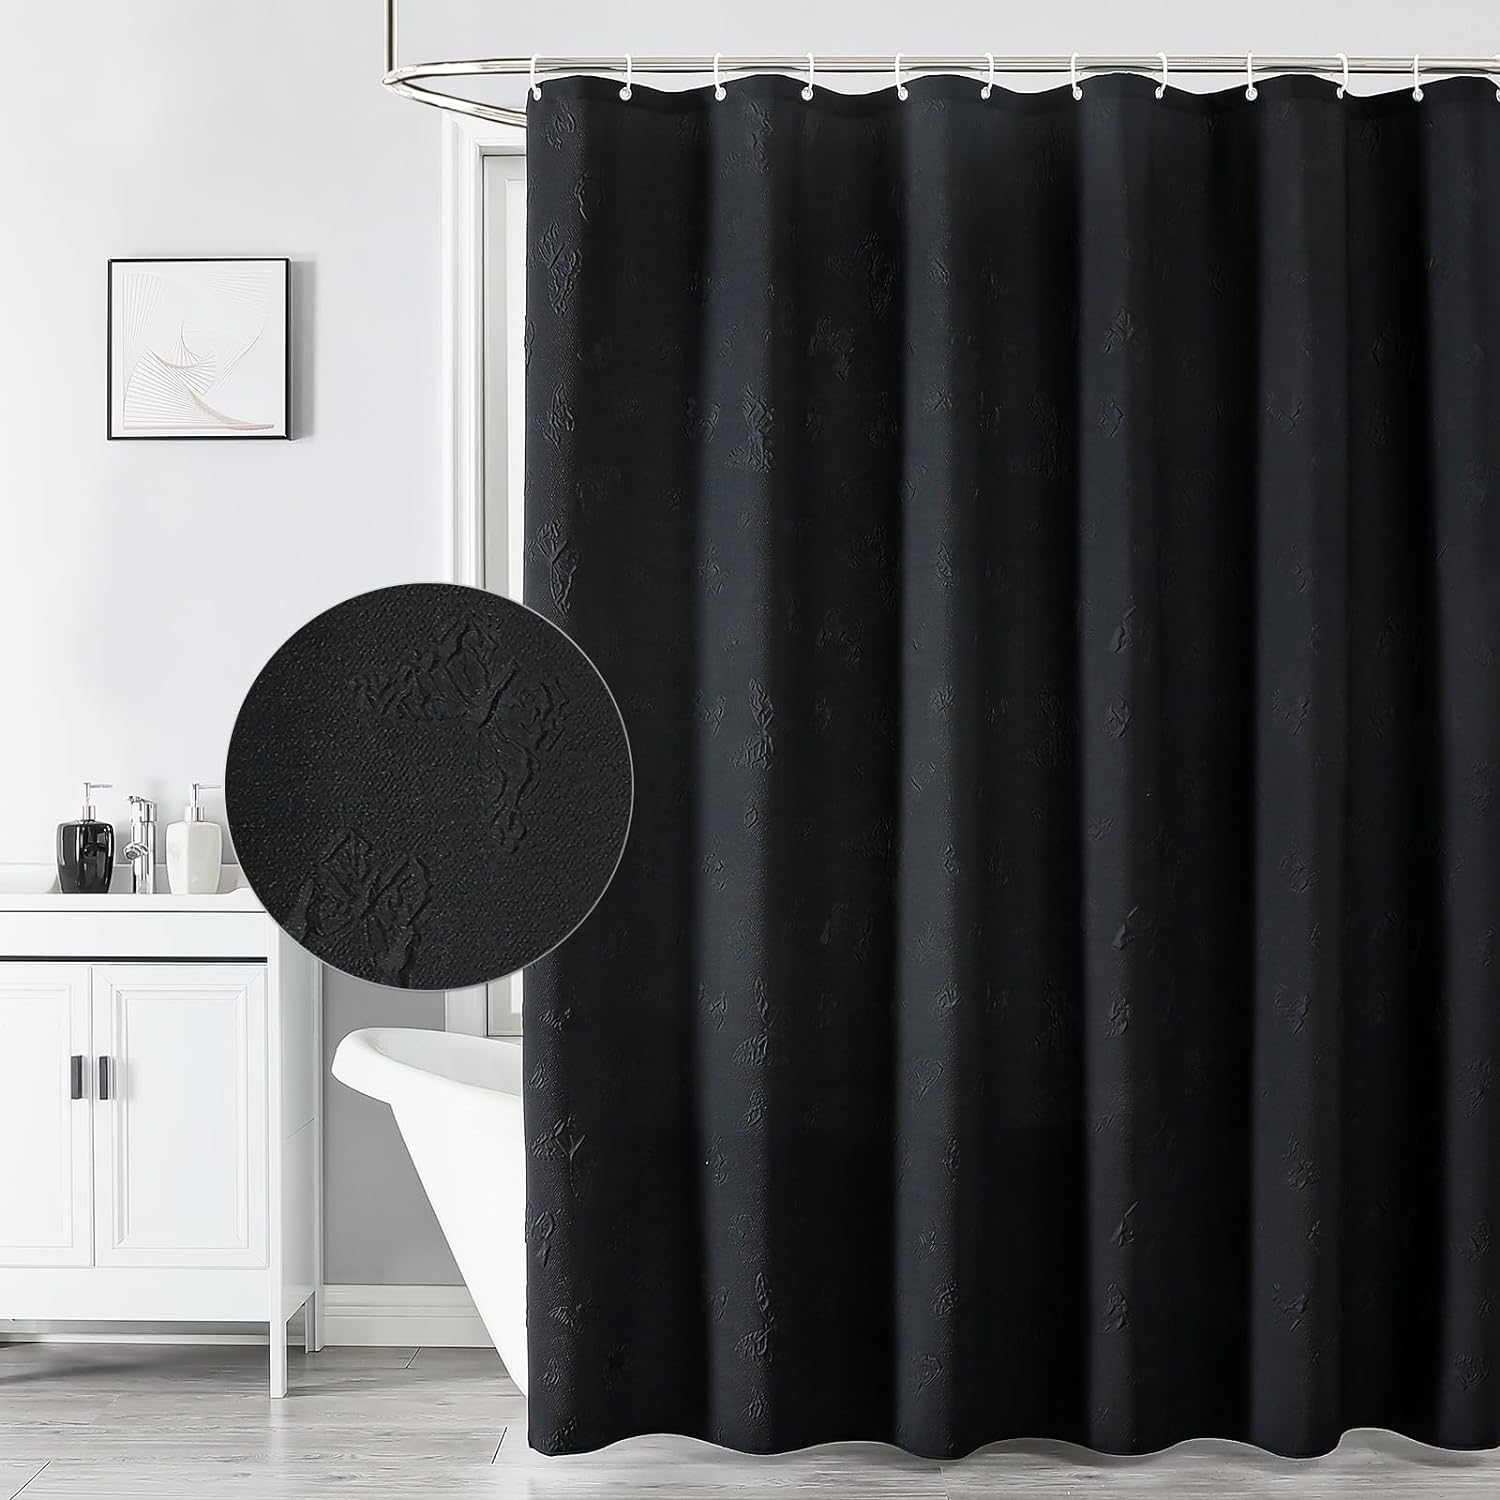 QiyI Black Shower Curtain for Bathroom, 3D Embossed Butterfly Textured Fabric Shower Curtain Liner, Hotel Style Luxury Bath Curtain, Modern Farmhouse Cloth Shower Curtain Set with Hooks, 72x72 Inch